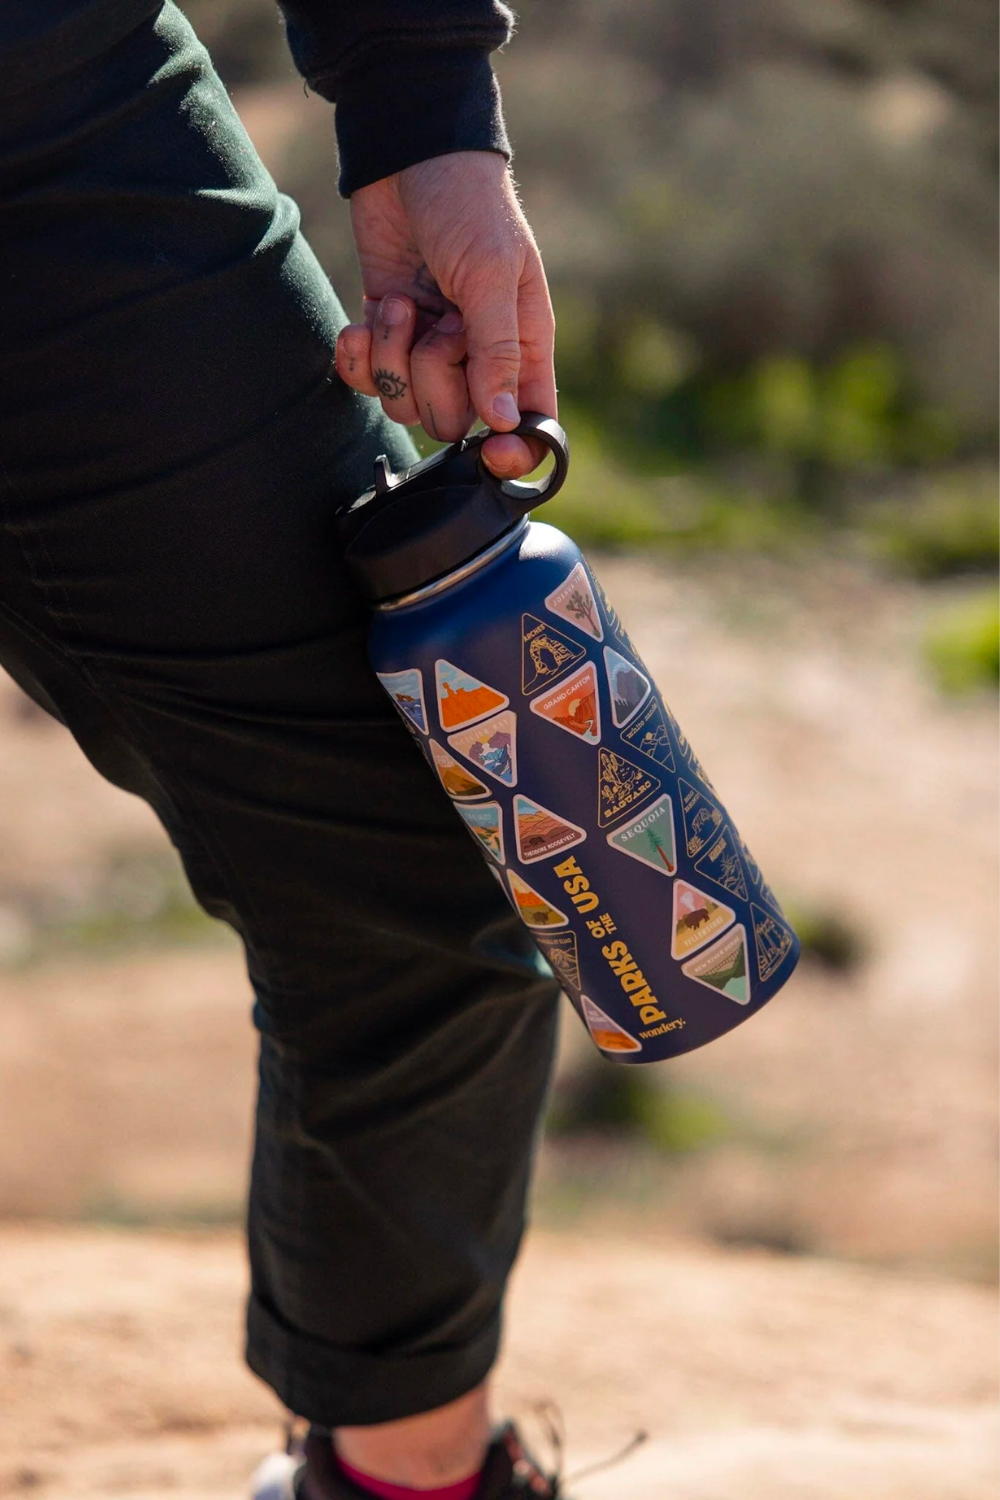 #color_ocean _blue travel camping hiking water bottle with carrying strap